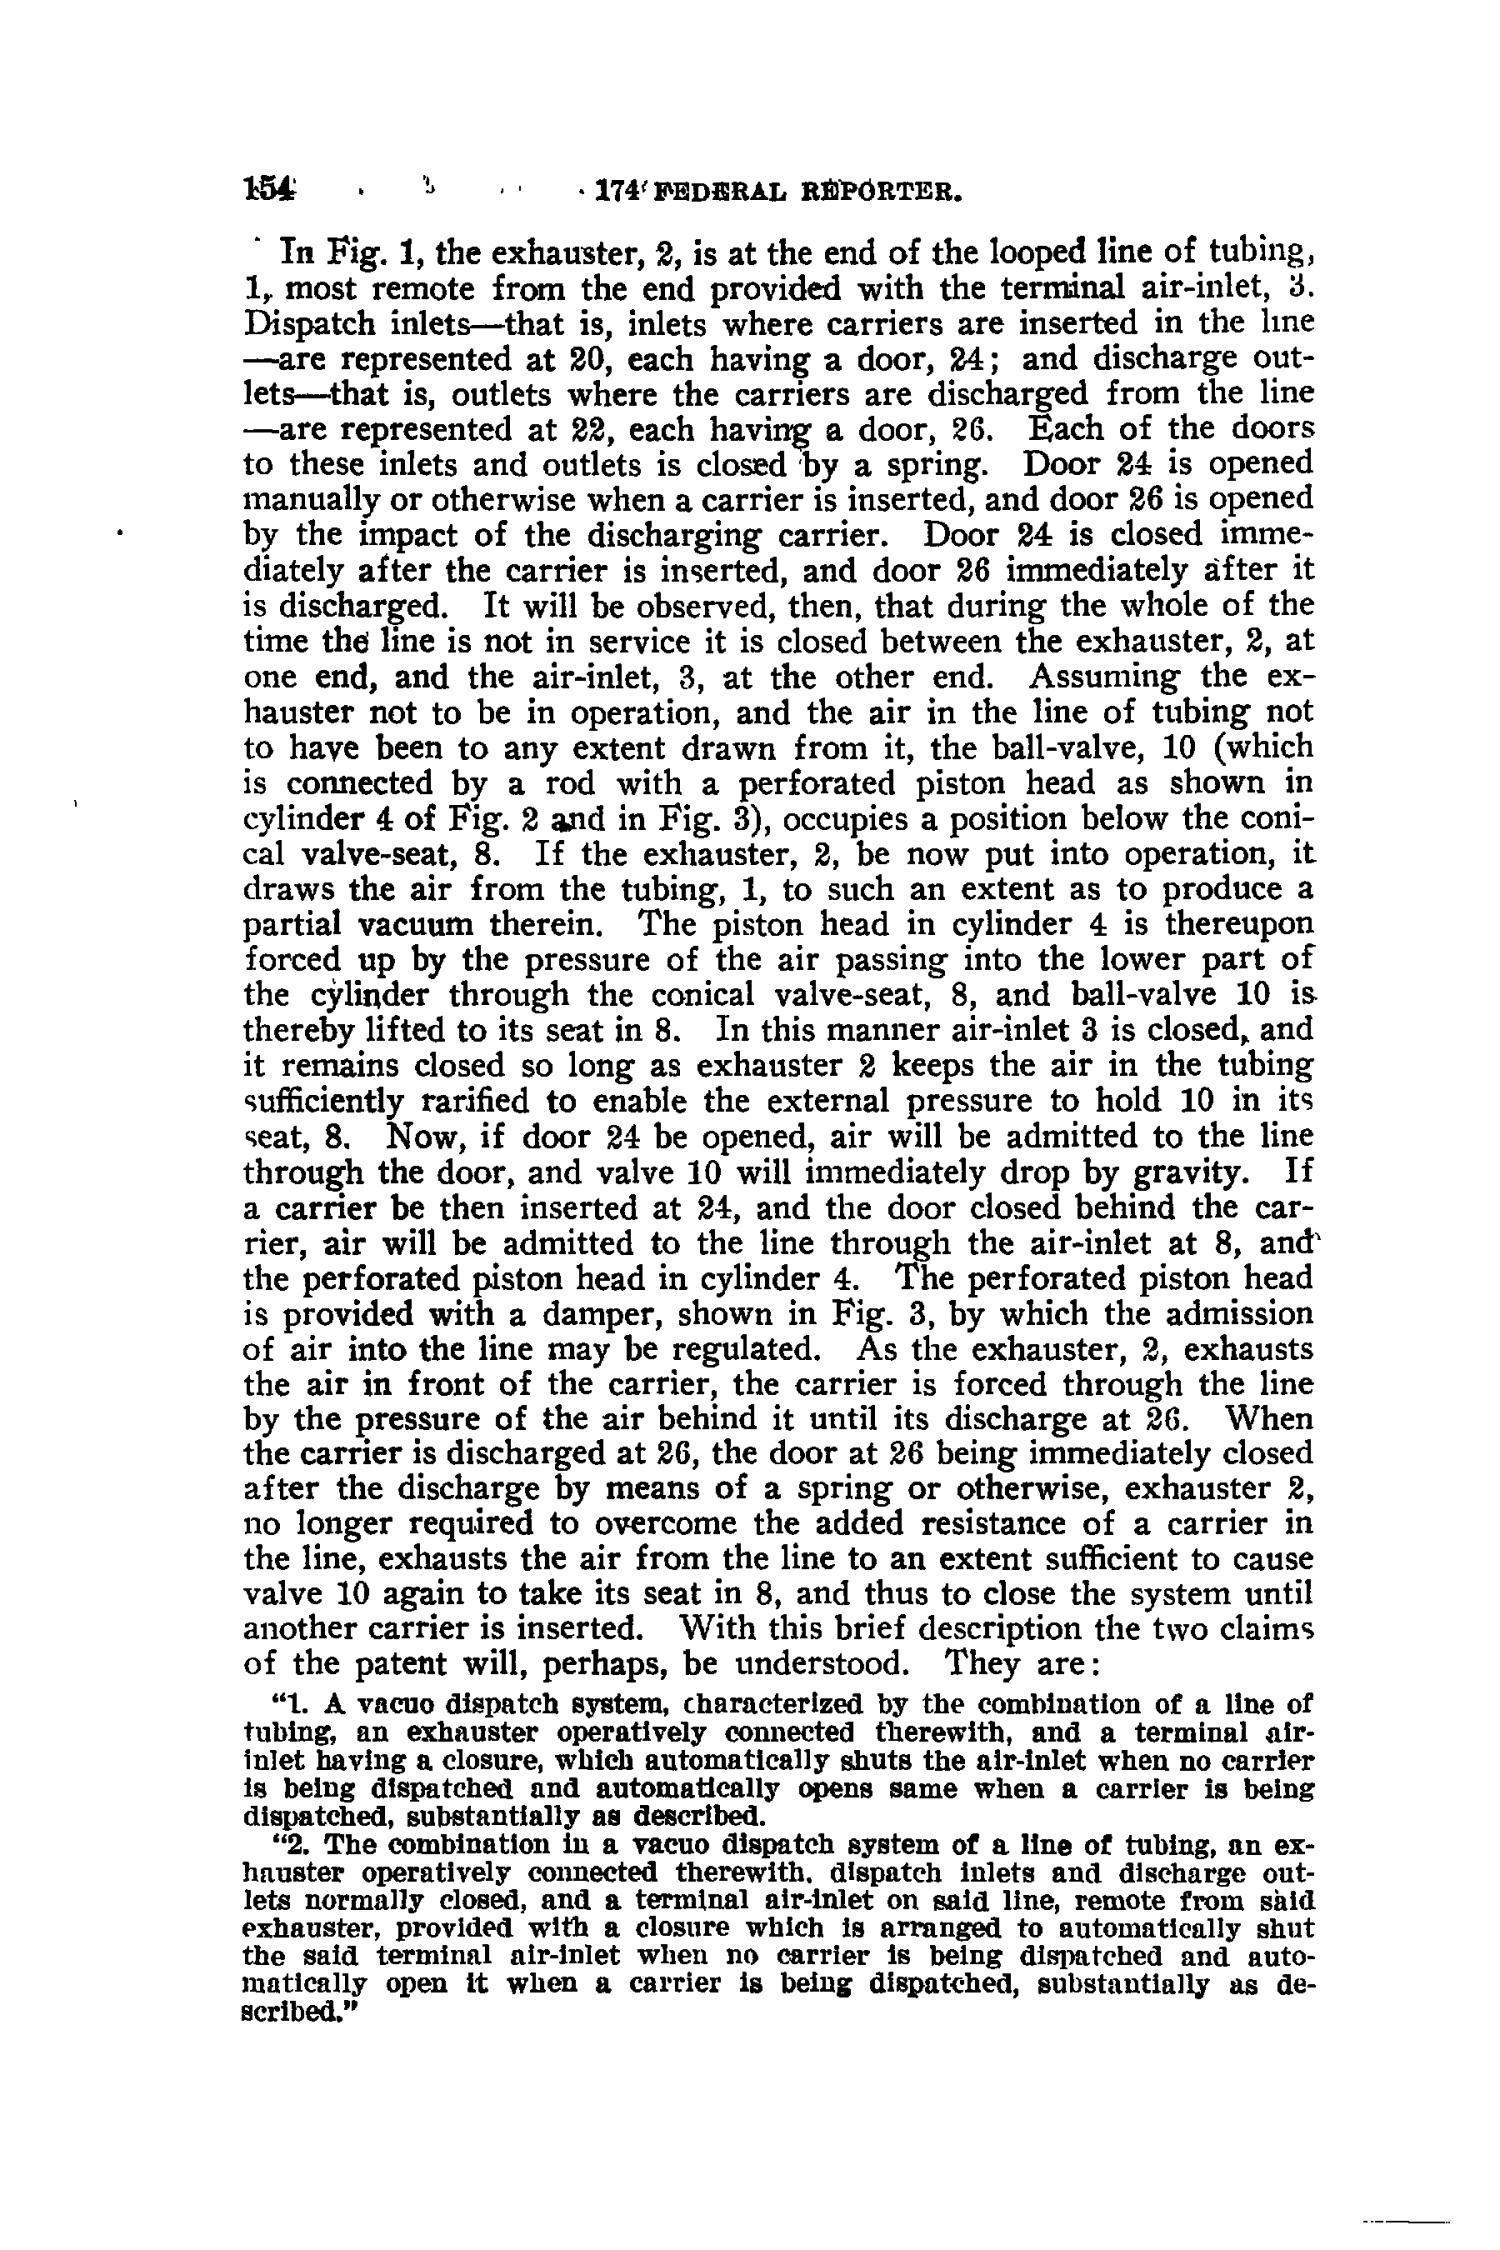 The Federal Reporter (Annotated), Volume 174: Cases Argued and Determined in the Circuit Courts of Appeals and Circuit and District Courts of the United States. January-March, 1910.
                                                
                                                    154
                                                